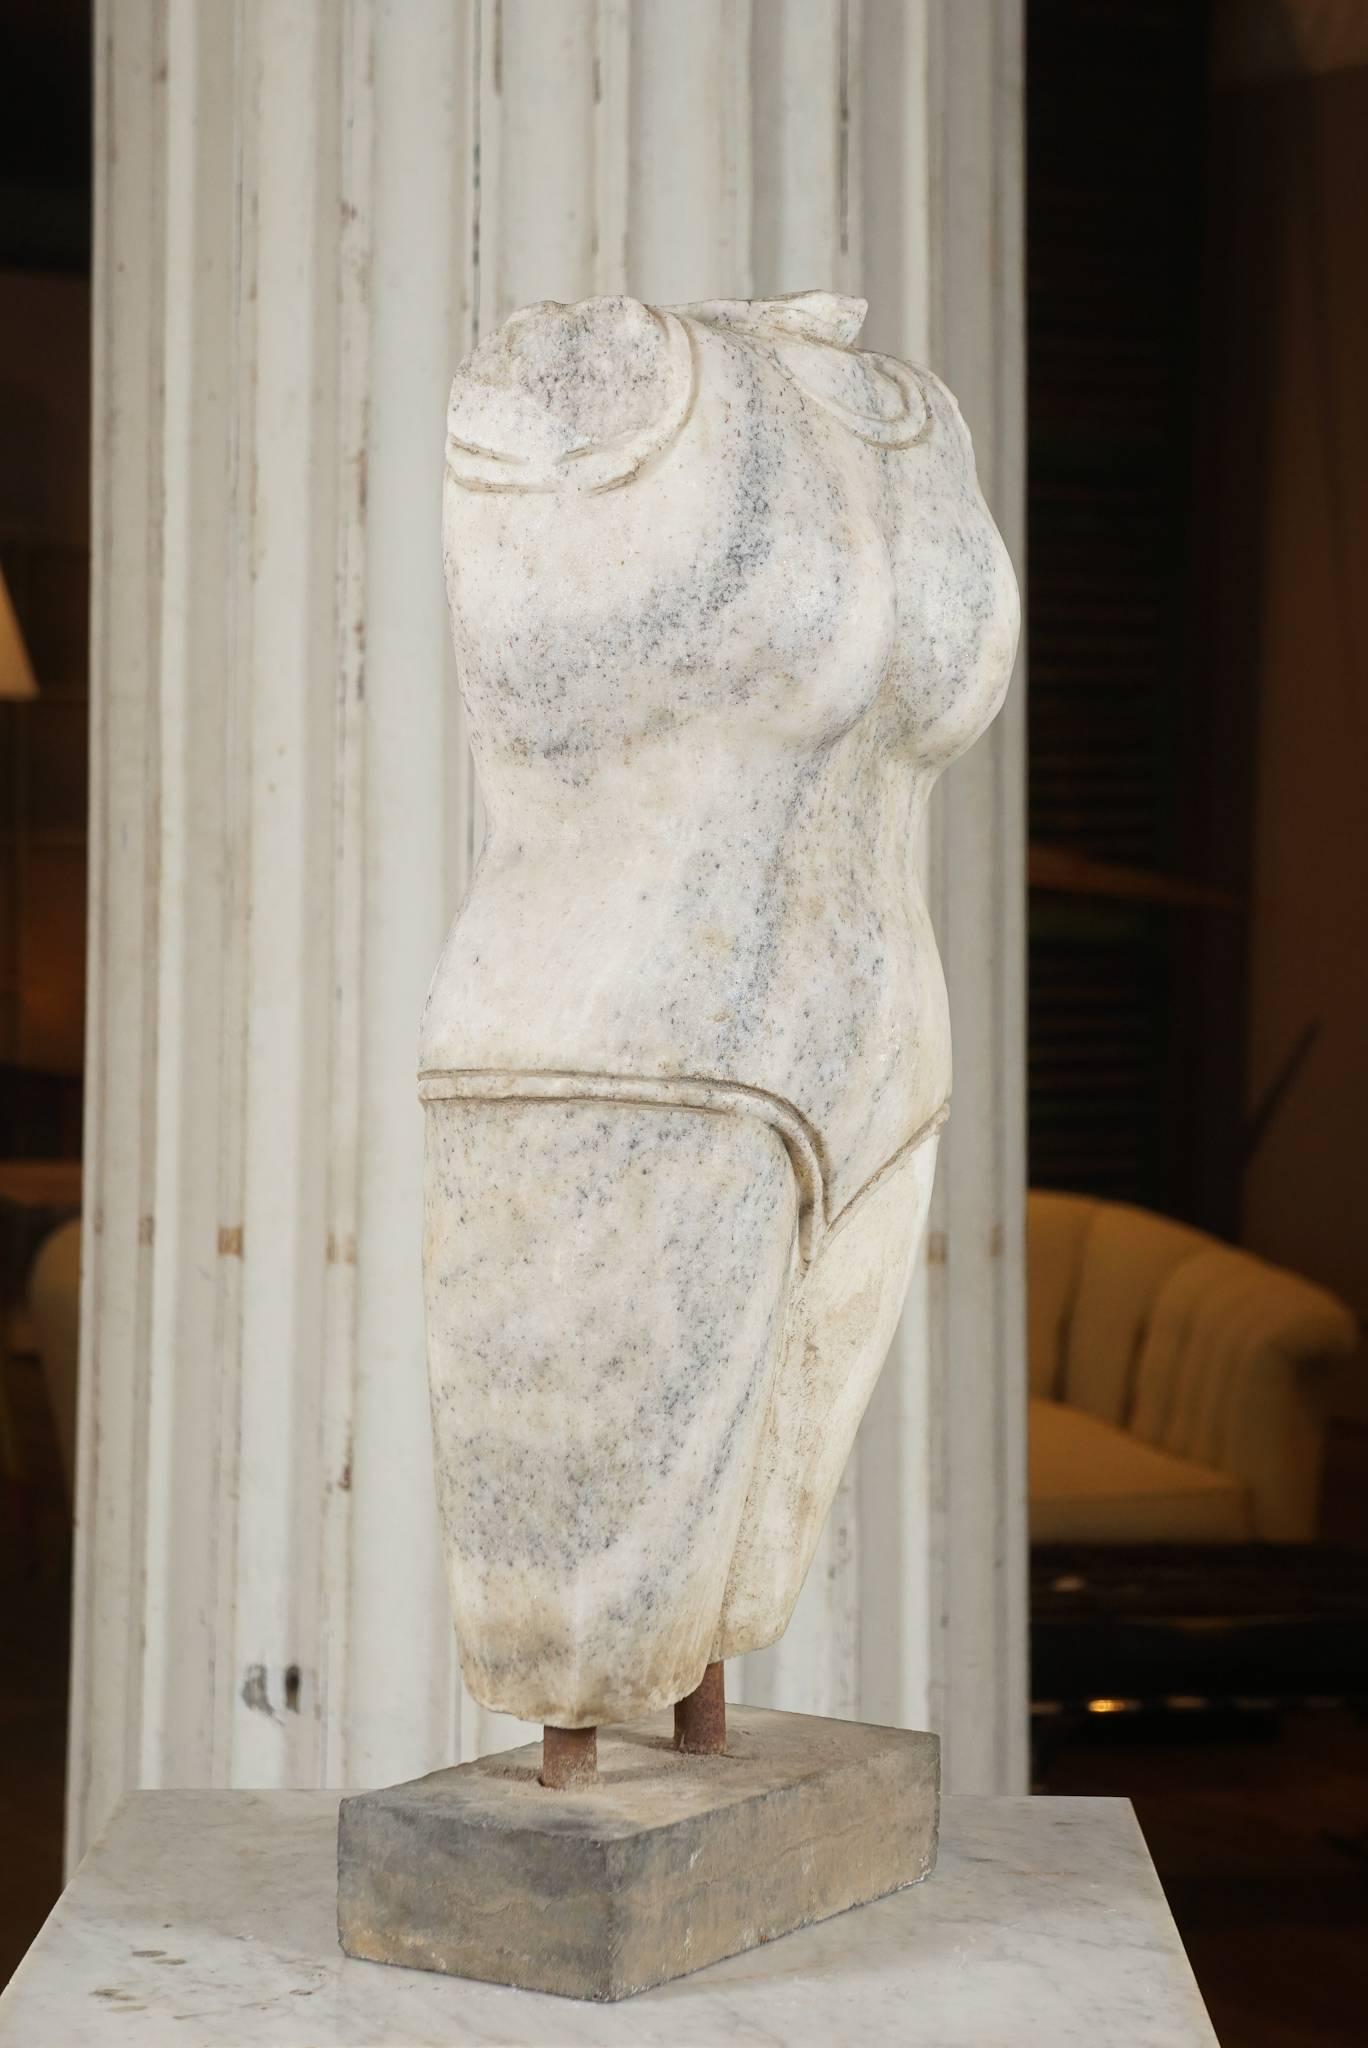 White marble with gray striations, torso of a woman mounted on a stone block, age and origin unknown.